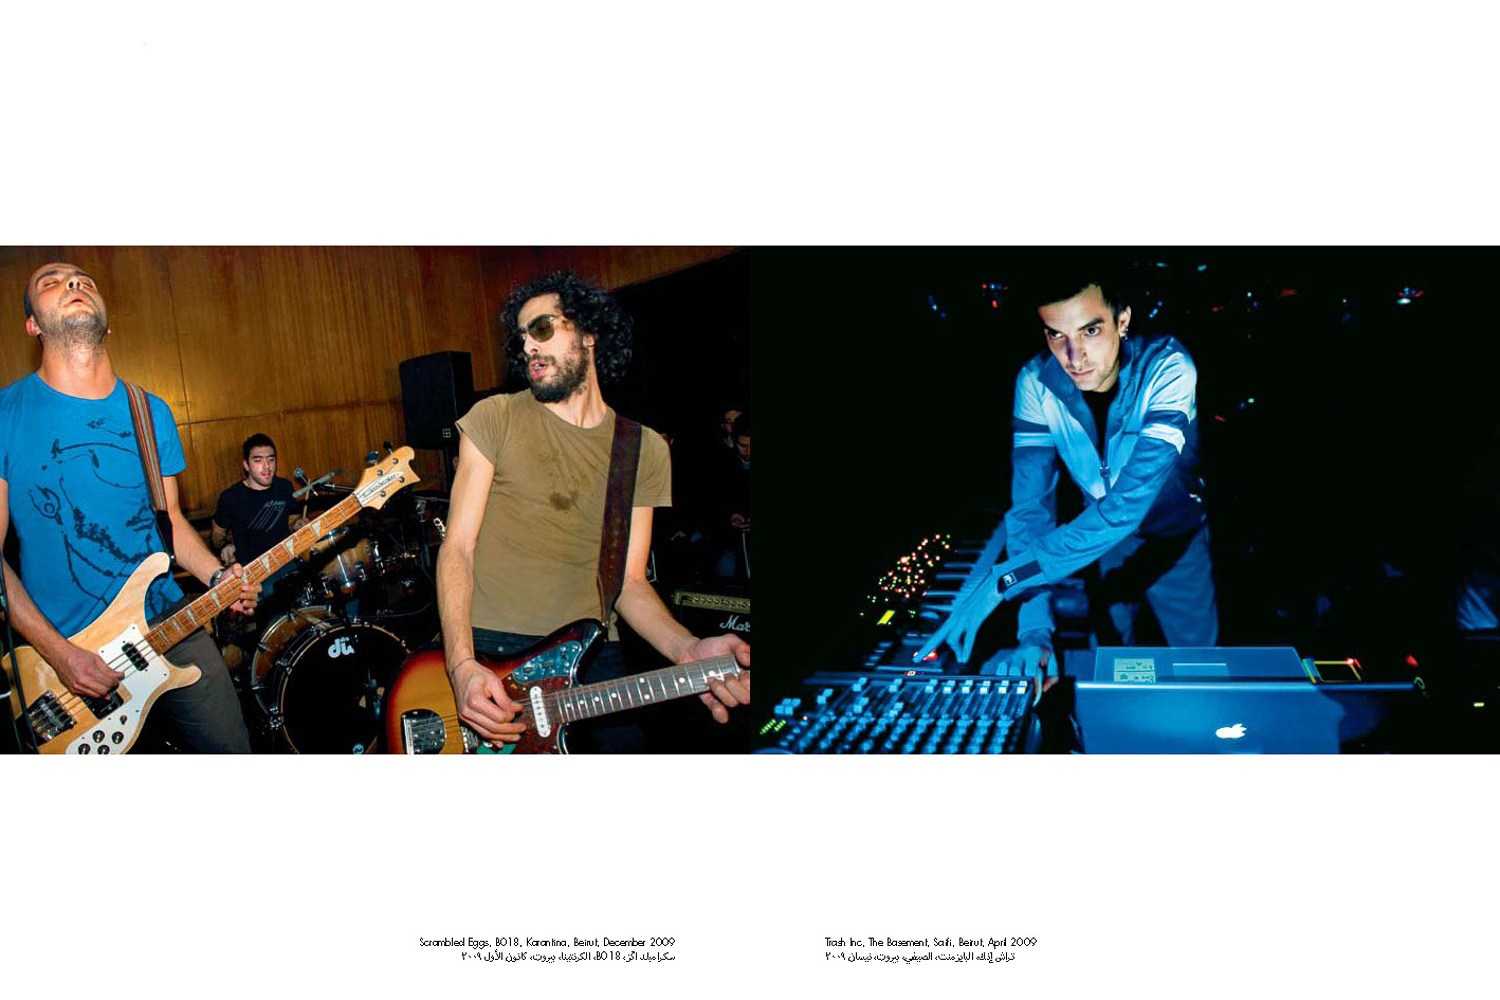   Untitled Tracks: On Alternative Music in Beirut  Book  Photographs by Tanya Traboulsi Edited by Ziad Nawfal and Ghalya Saadawi Published by Amers Editions Beirut,&nbsp;Lebanon Soft cover, full color, 166 pages 18 x 24cm March 2010   Untitled Tracks